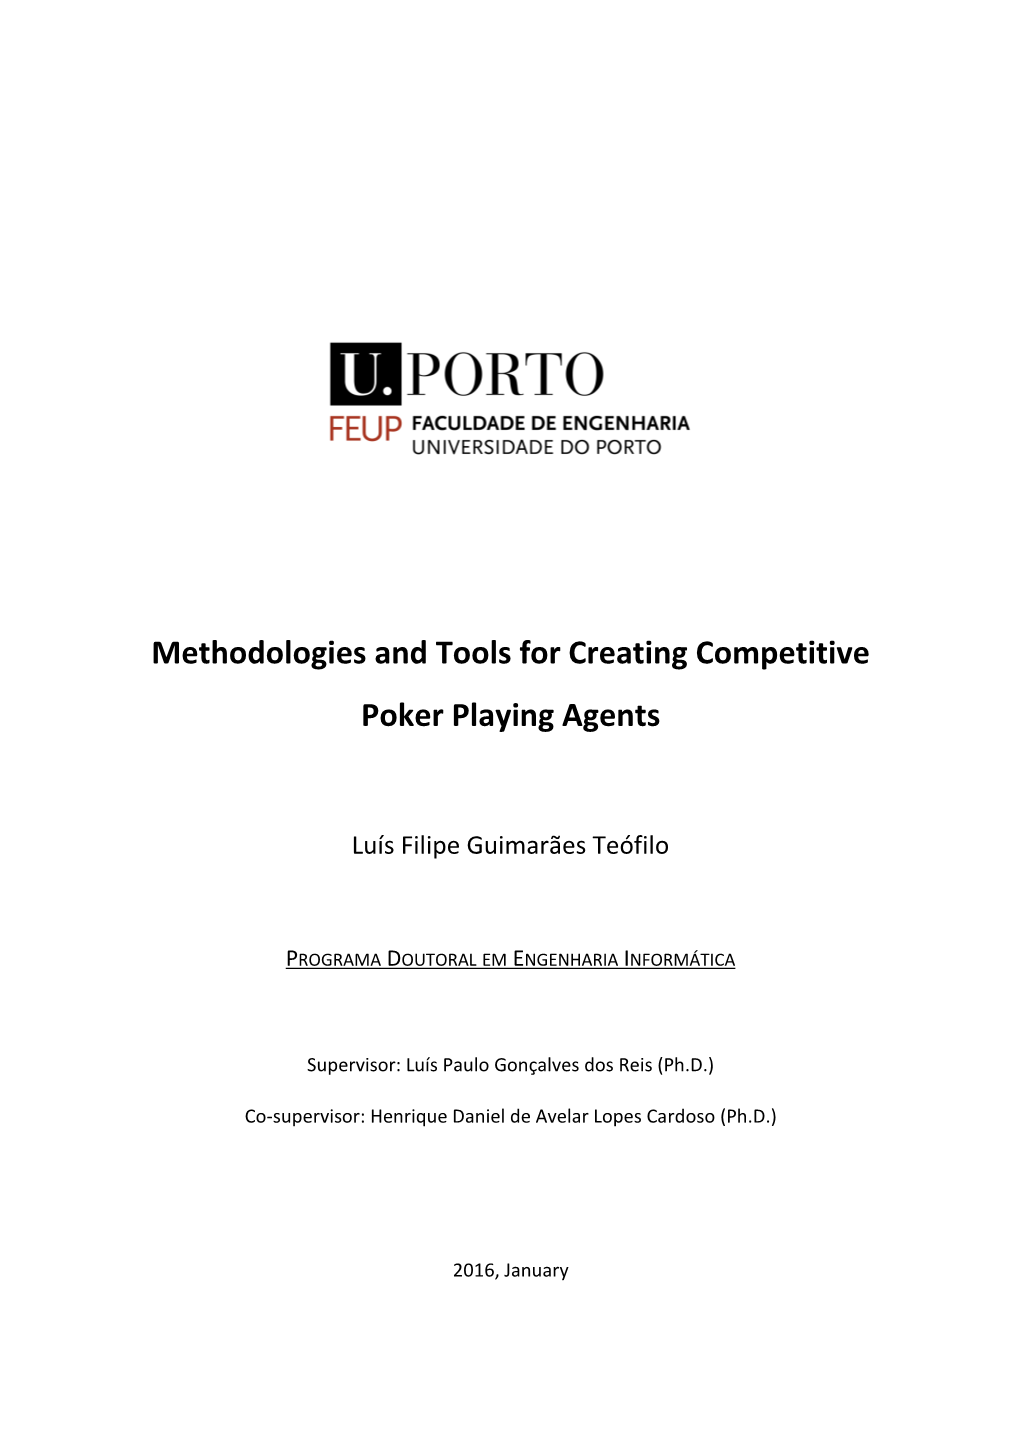 Methodologies and Tools for Creating Competitive Poker Playing Agents